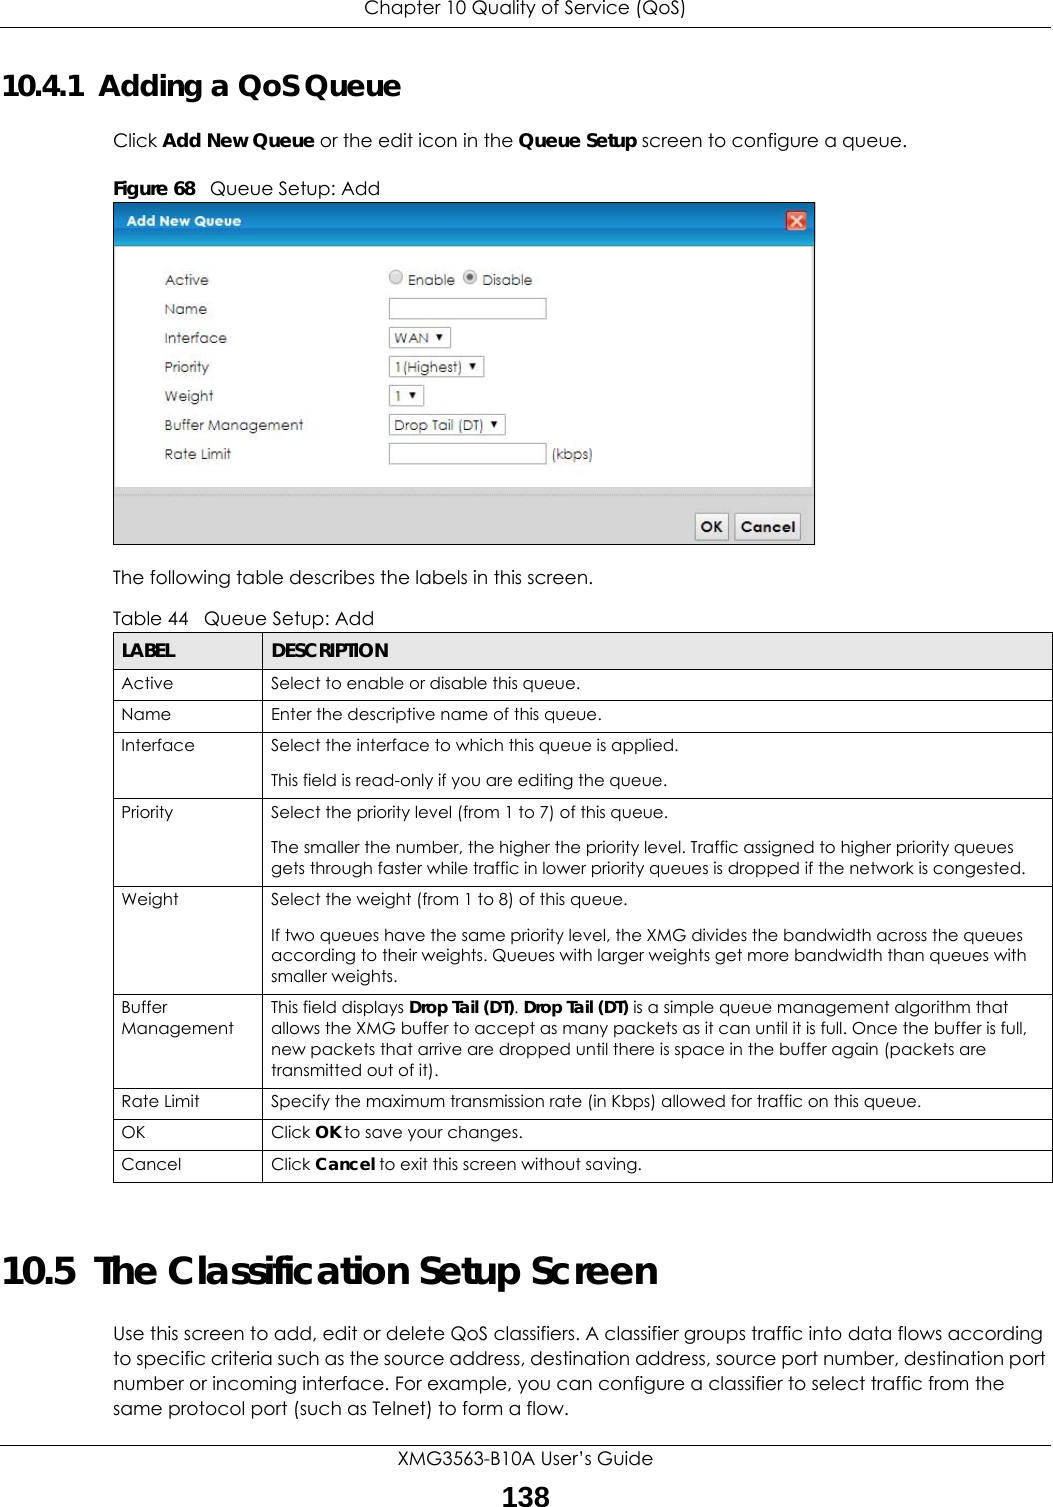 Chapter 10 Quality of Service (QoS)XMG3563-B10A User’s Guide13810.4.1  Adding a QoS Queue Click Add New Queue or the edit icon in the Queue Setup screen to configure a queue. Figure 68   Queue Setup: Add The following table describes the labels in this screen.  10.5  The Classification Setup Screen Use this screen to add, edit or delete QoS classifiers. A classifier groups traffic into data flows according to specific criteria such as the source address, destination address, source port number, destination port number or incoming interface. For example, you can configure a classifier to select traffic from the same protocol port (such as Telnet) to form a flow.Table 44   Queue Setup: AddLABEL DESCRIPTIONActive Select to enable or disable this queue.Name Enter the descriptive name of this queue.Interface Select the interface to which this queue is applied.This field is read-only if you are editing the queue.Priority Select the priority level (from 1 to 7) of this queue.The smaller the number, the higher the priority level. Traffic assigned to higher priority queues gets through faster while traffic in lower priority queues is dropped if the network is congested.Weight Select the weight (from 1 to 8) of this queue. If two queues have the same priority level, the XMG divides the bandwidth across the queues according to their weights. Queues with larger weights get more bandwidth than queues with smaller weights.Buffer ManagementThis field displays Drop Tail (DT). Drop Tail (DT) is a simple queue management algorithm that allows the XMG buffer to accept as many packets as it can until it is full. Once the buffer is full, new packets that arrive are dropped until there is space in the buffer again (packets are transmitted out of it). Rate Limit Specify the maximum transmission rate (in Kbps) allowed for traffic on this queue.OK Click OK to save your changes.Cancel Click Cancel to exit this screen without saving.